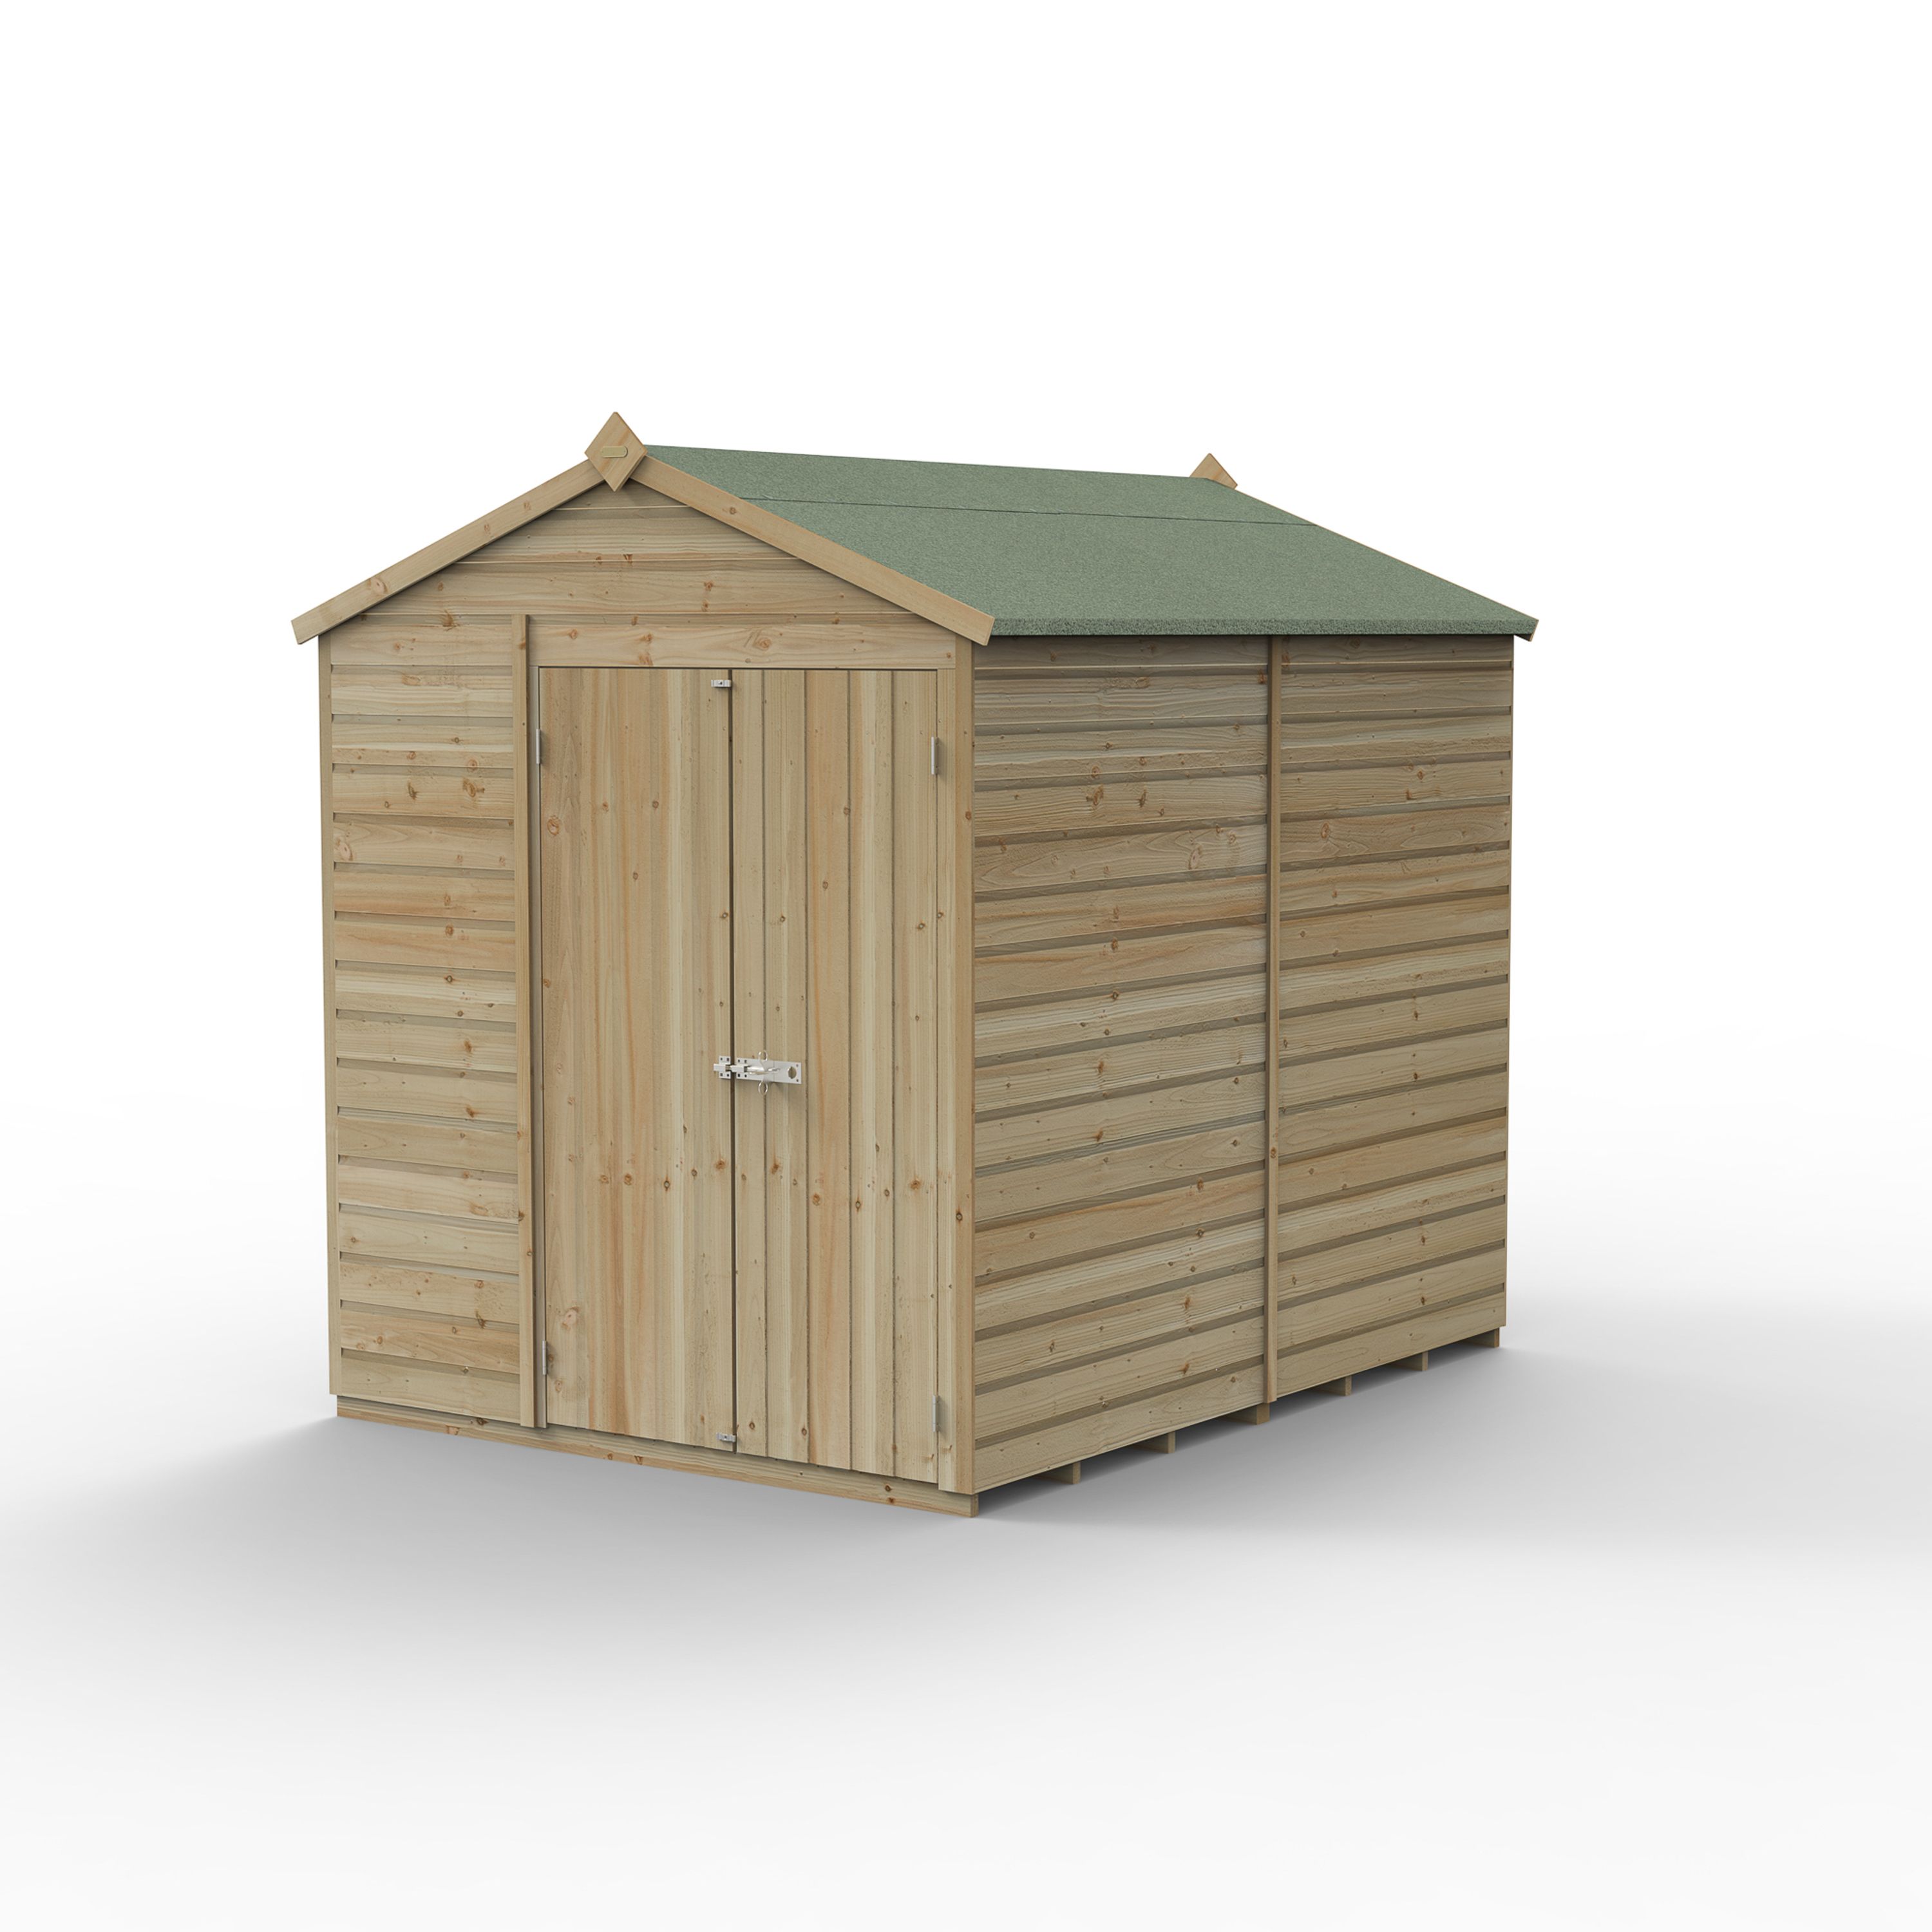 Forest Garden Beckwood 8x6 ft Apex Natural timber Wooden 2 door Shed with floor (Base included)